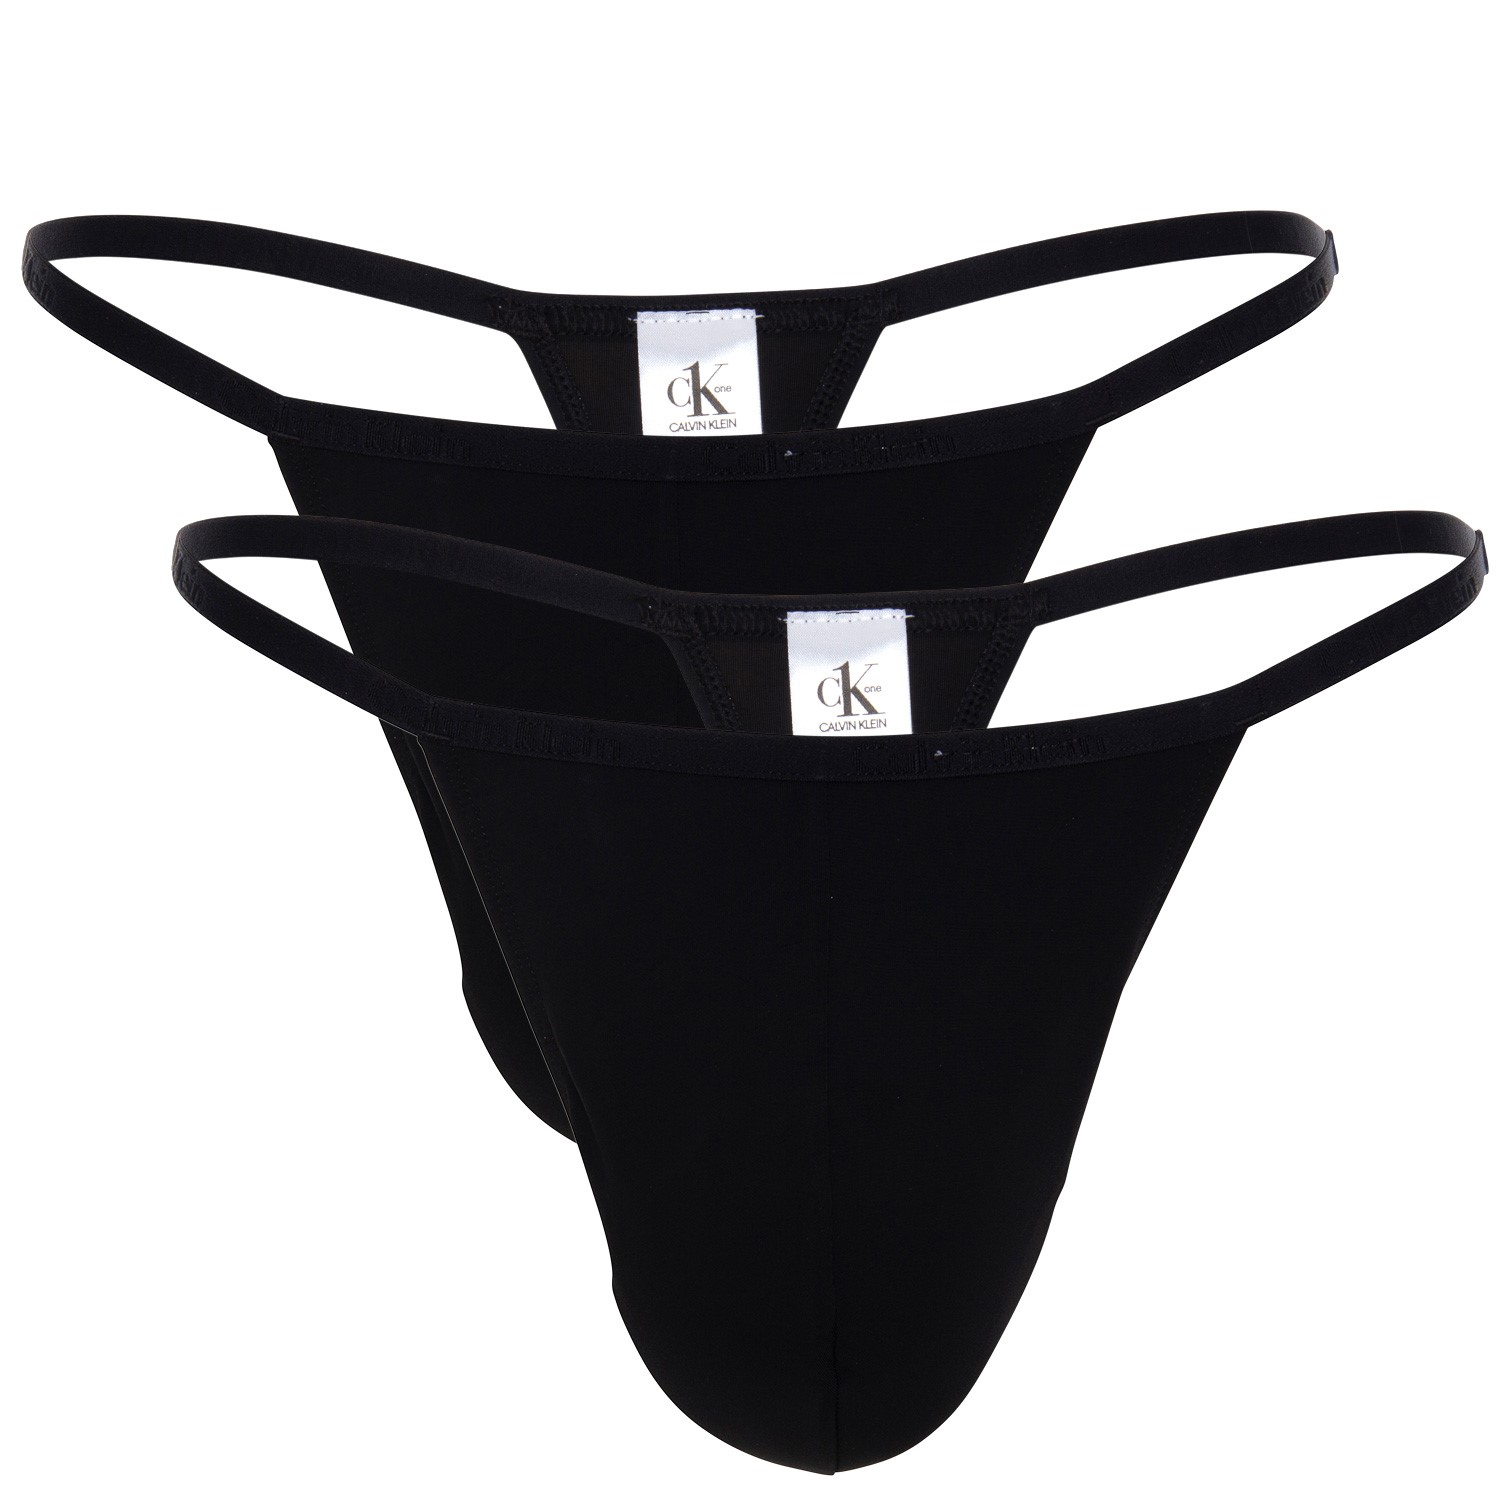 Calvin Klein CK One Thong For Men - Thong - Trunks - Underwear -  Timarco.co.uk